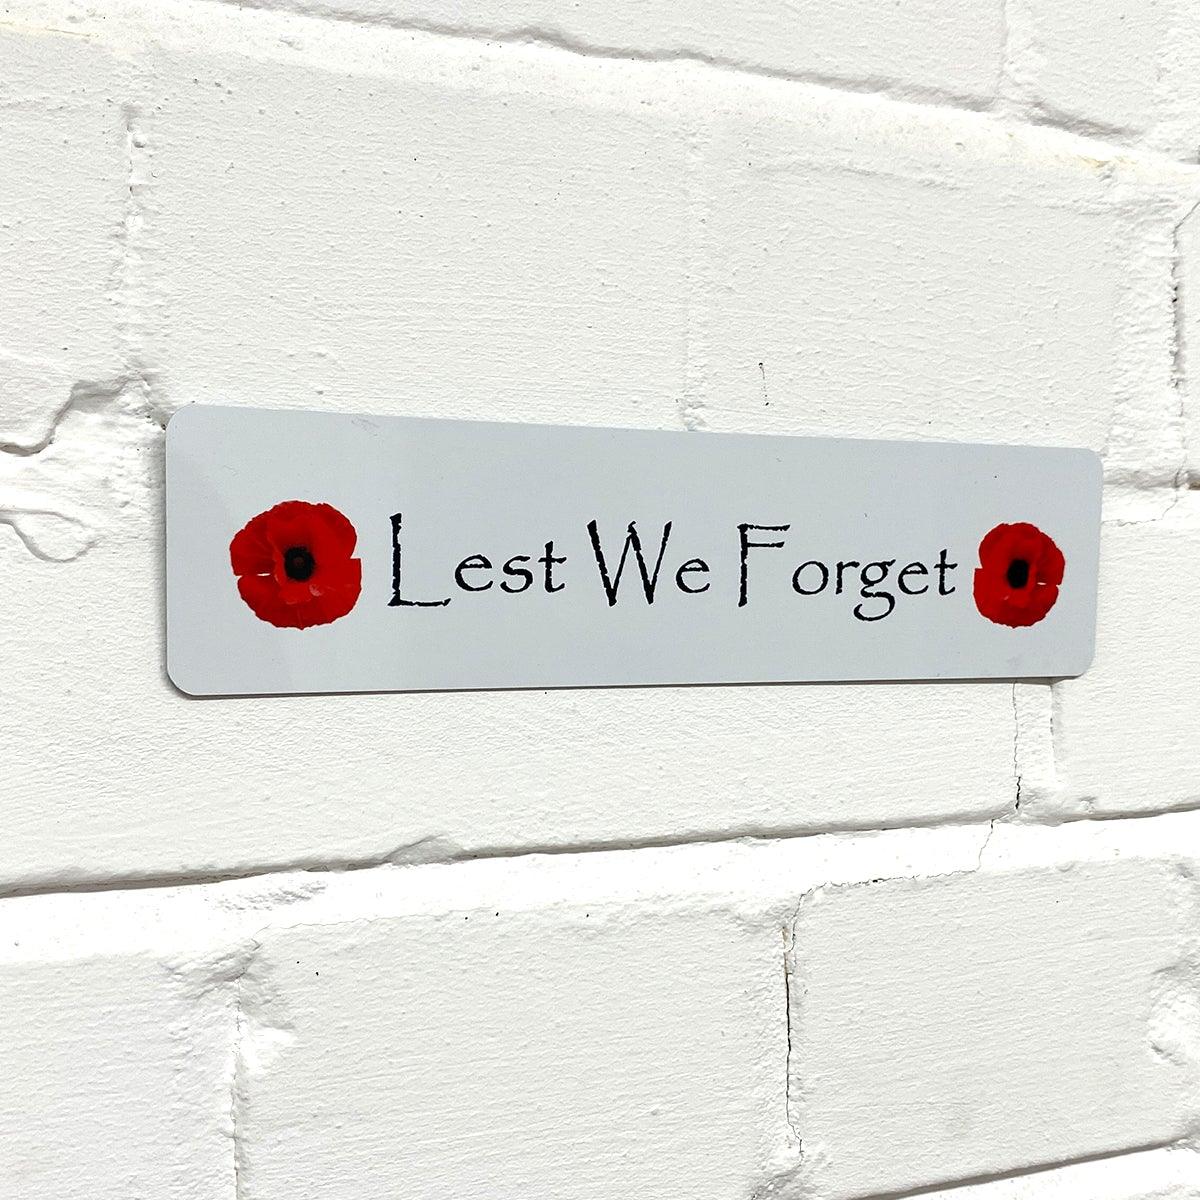 Military Poppy Lest We Forget Printed on Metal Aluminium Plaque (20x5 cm, 7.8x2 inches) - shopquality4u